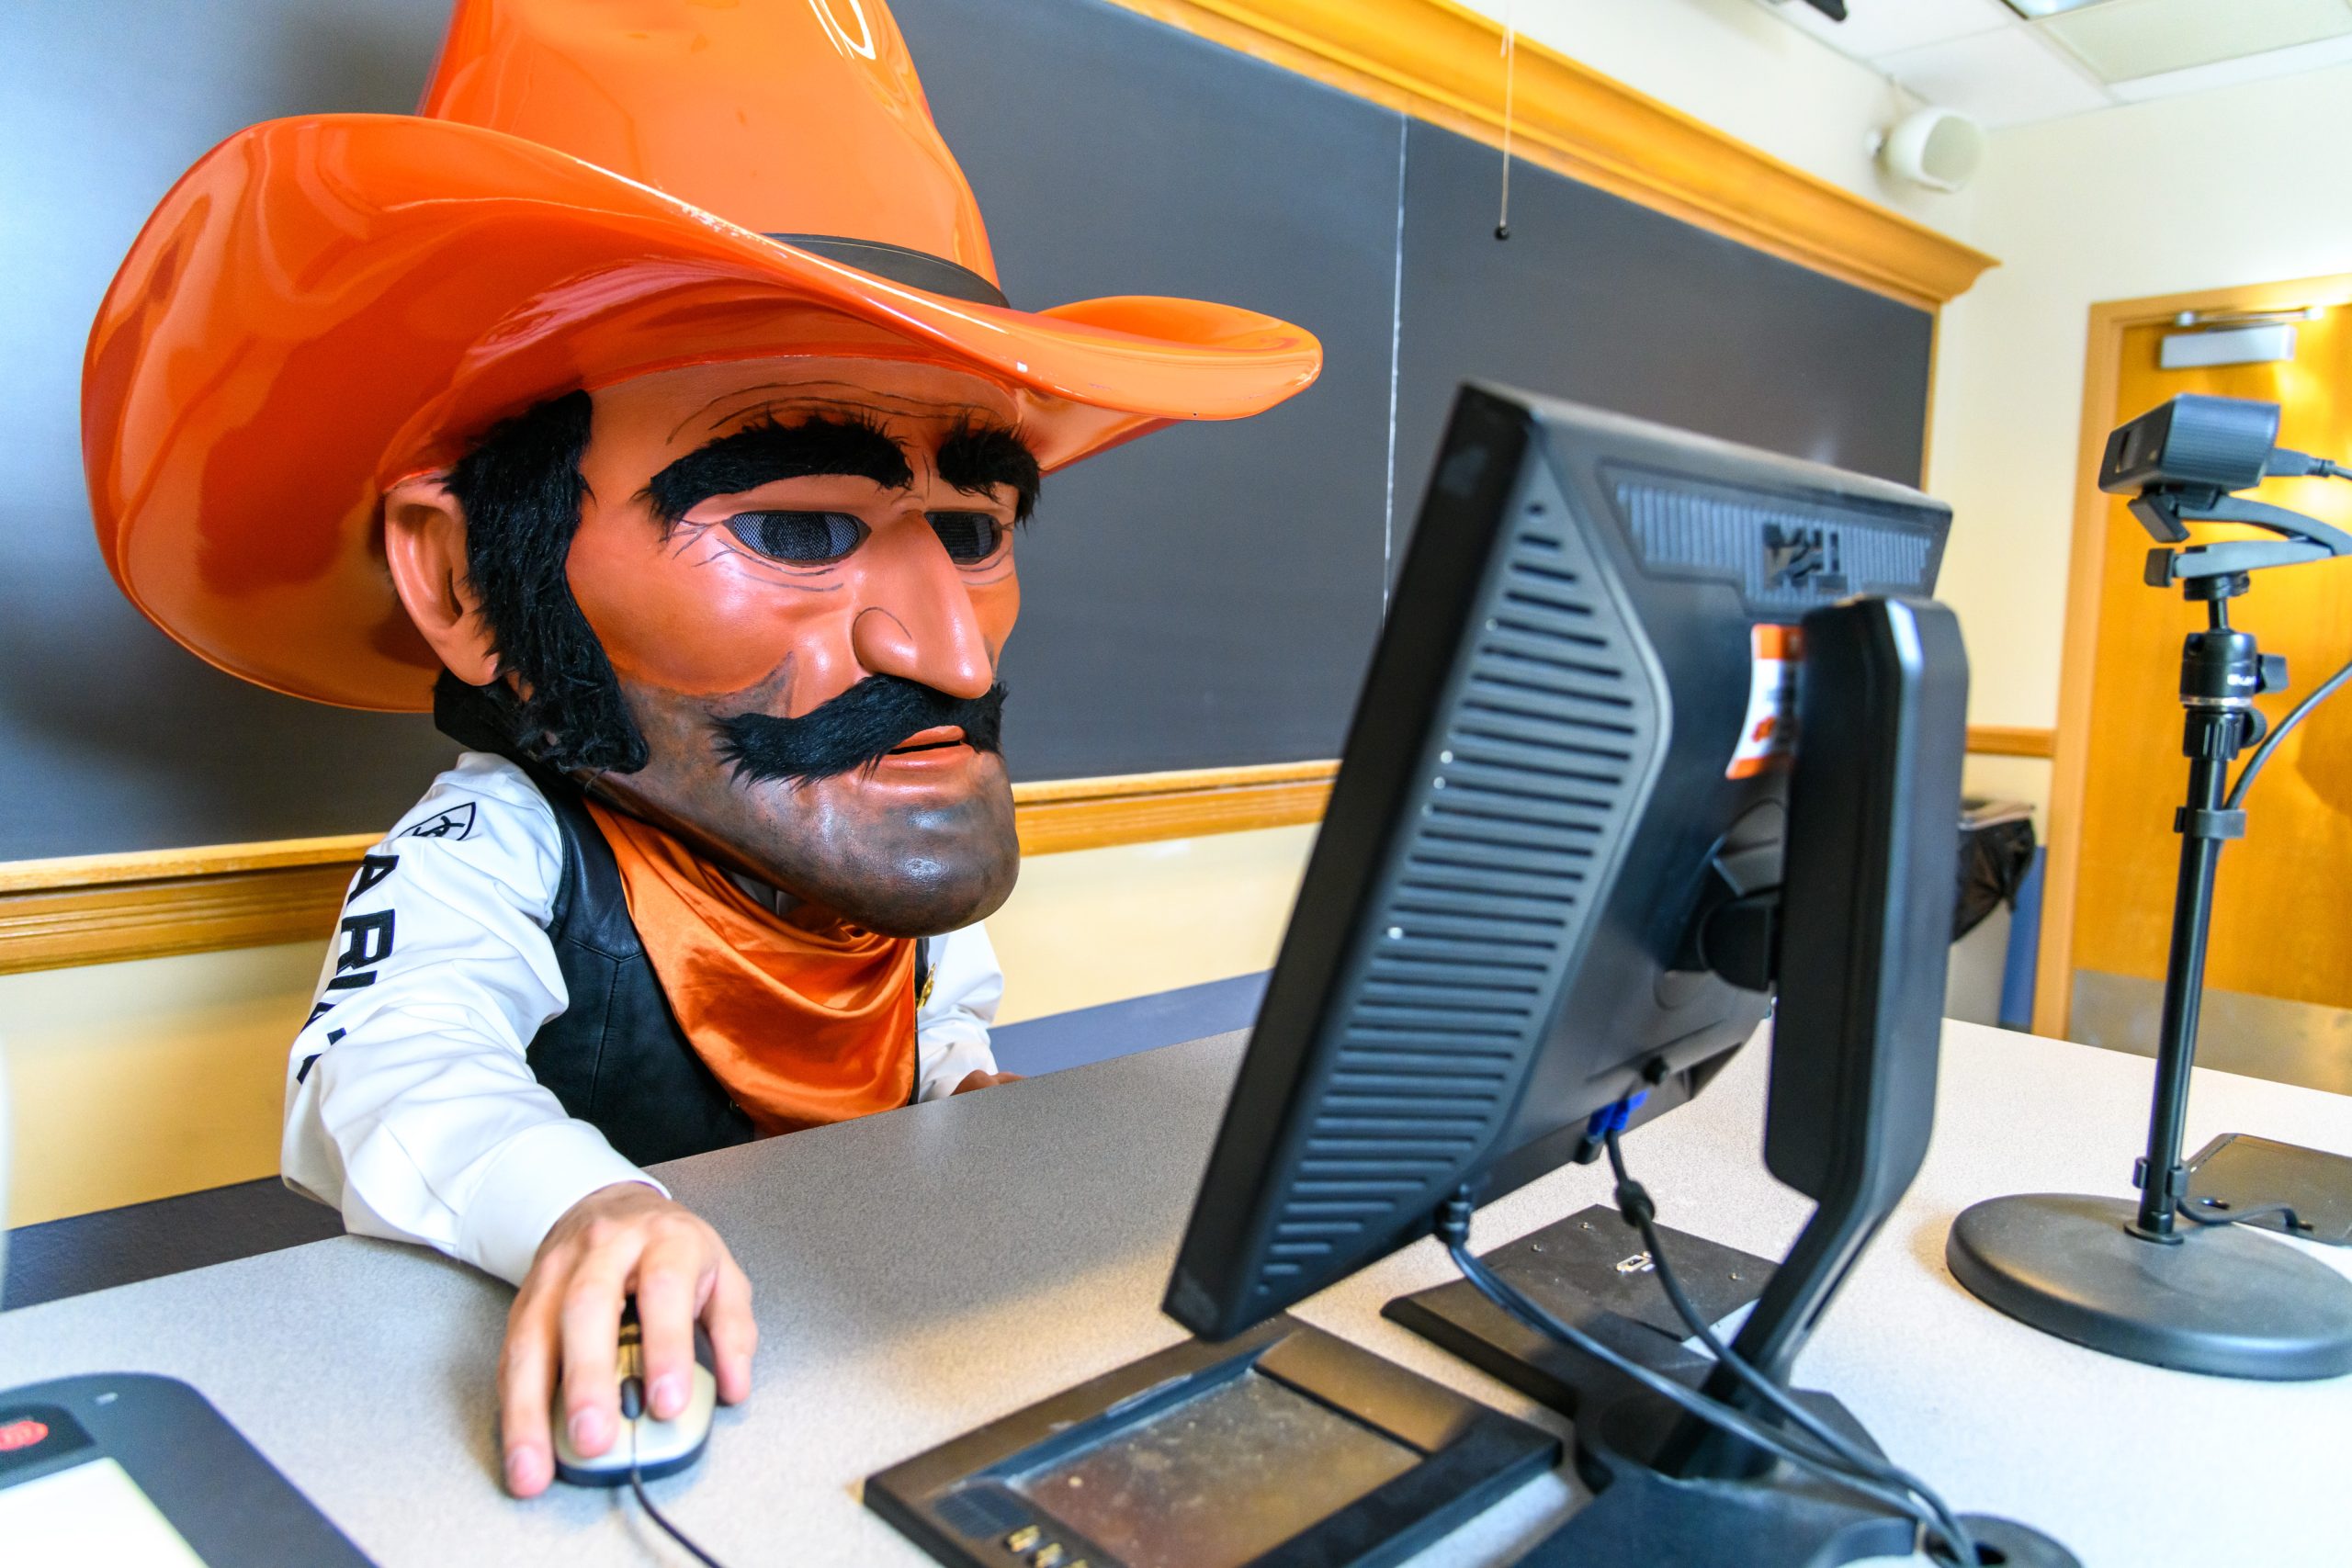 Pistol Pete sits at a desk while using a computer.